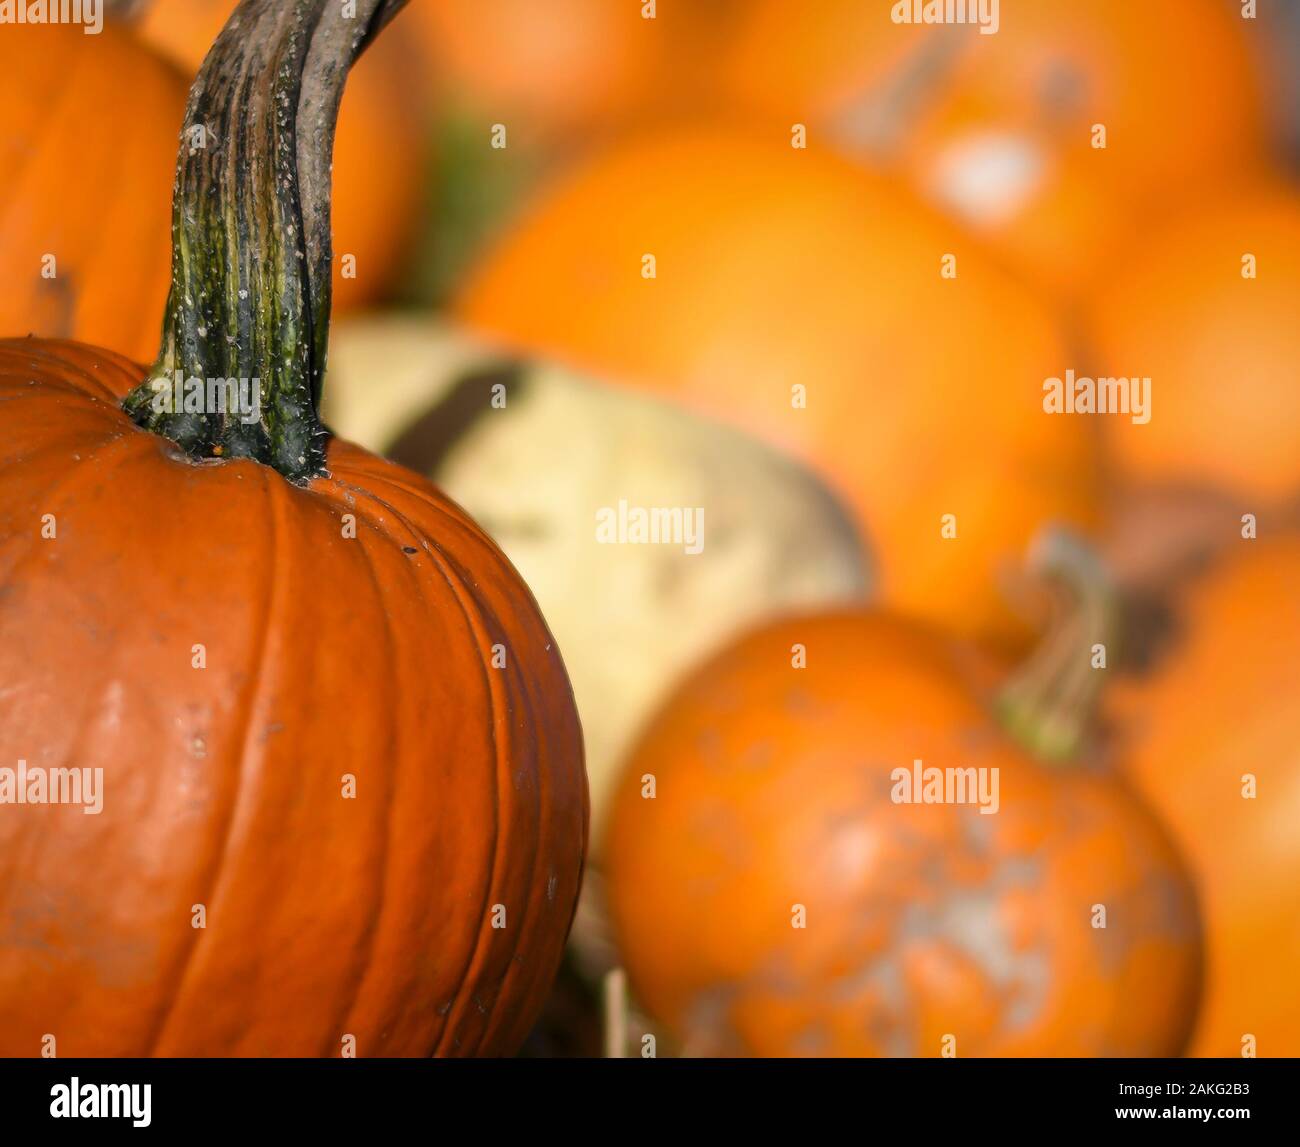 pumpkin patch with ripe pumpkins ready for picking Stock Photo